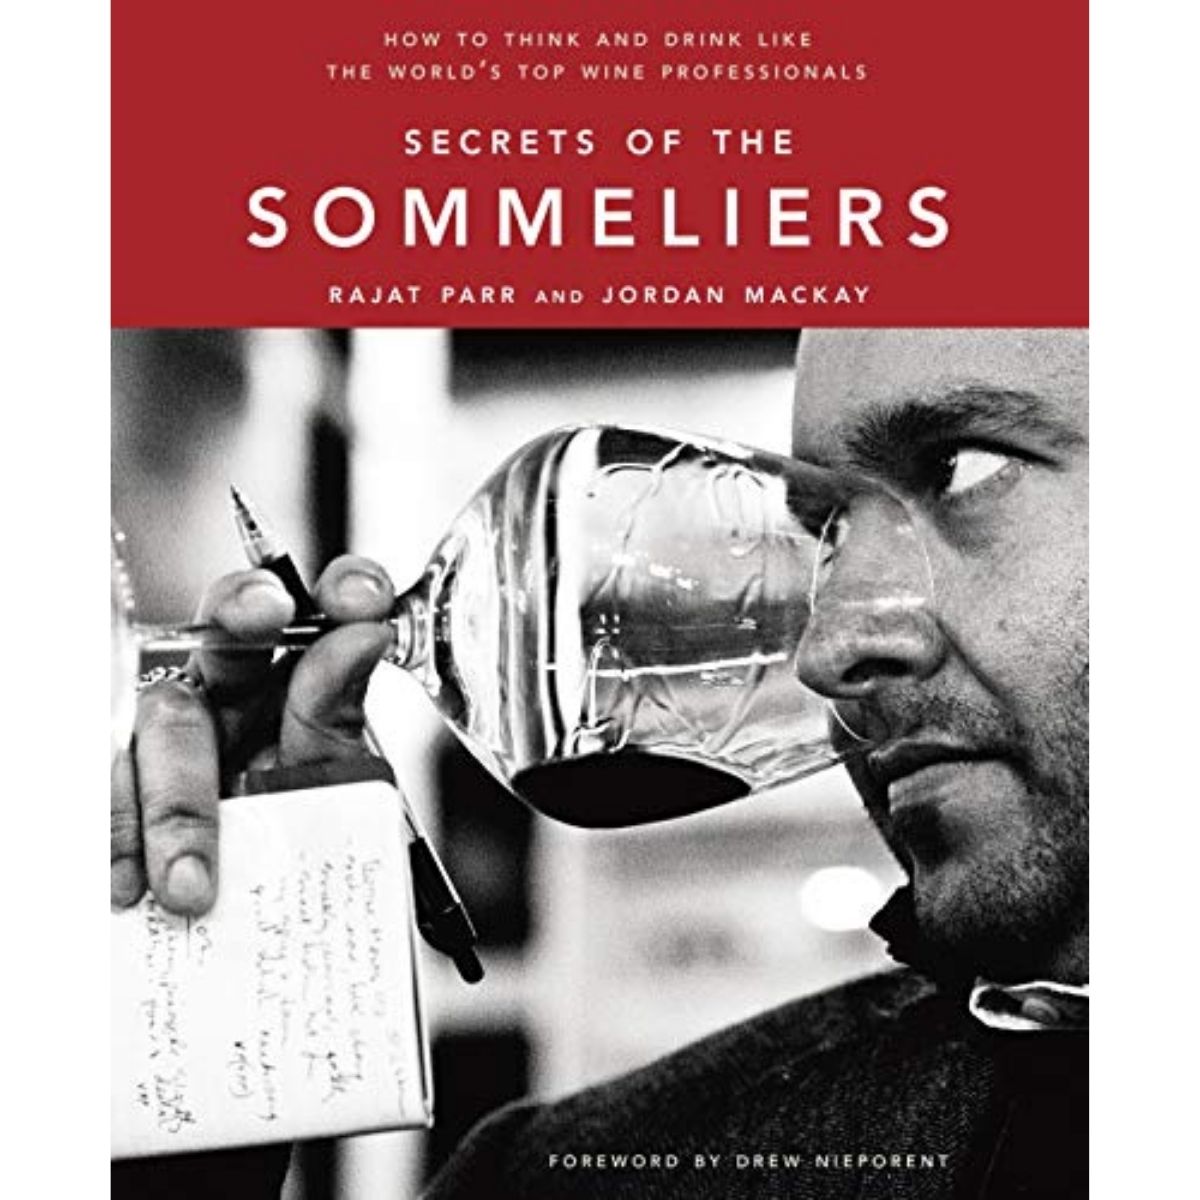 The Best Gifts for Wine Lovers Option: Secrets of the Sommeliers